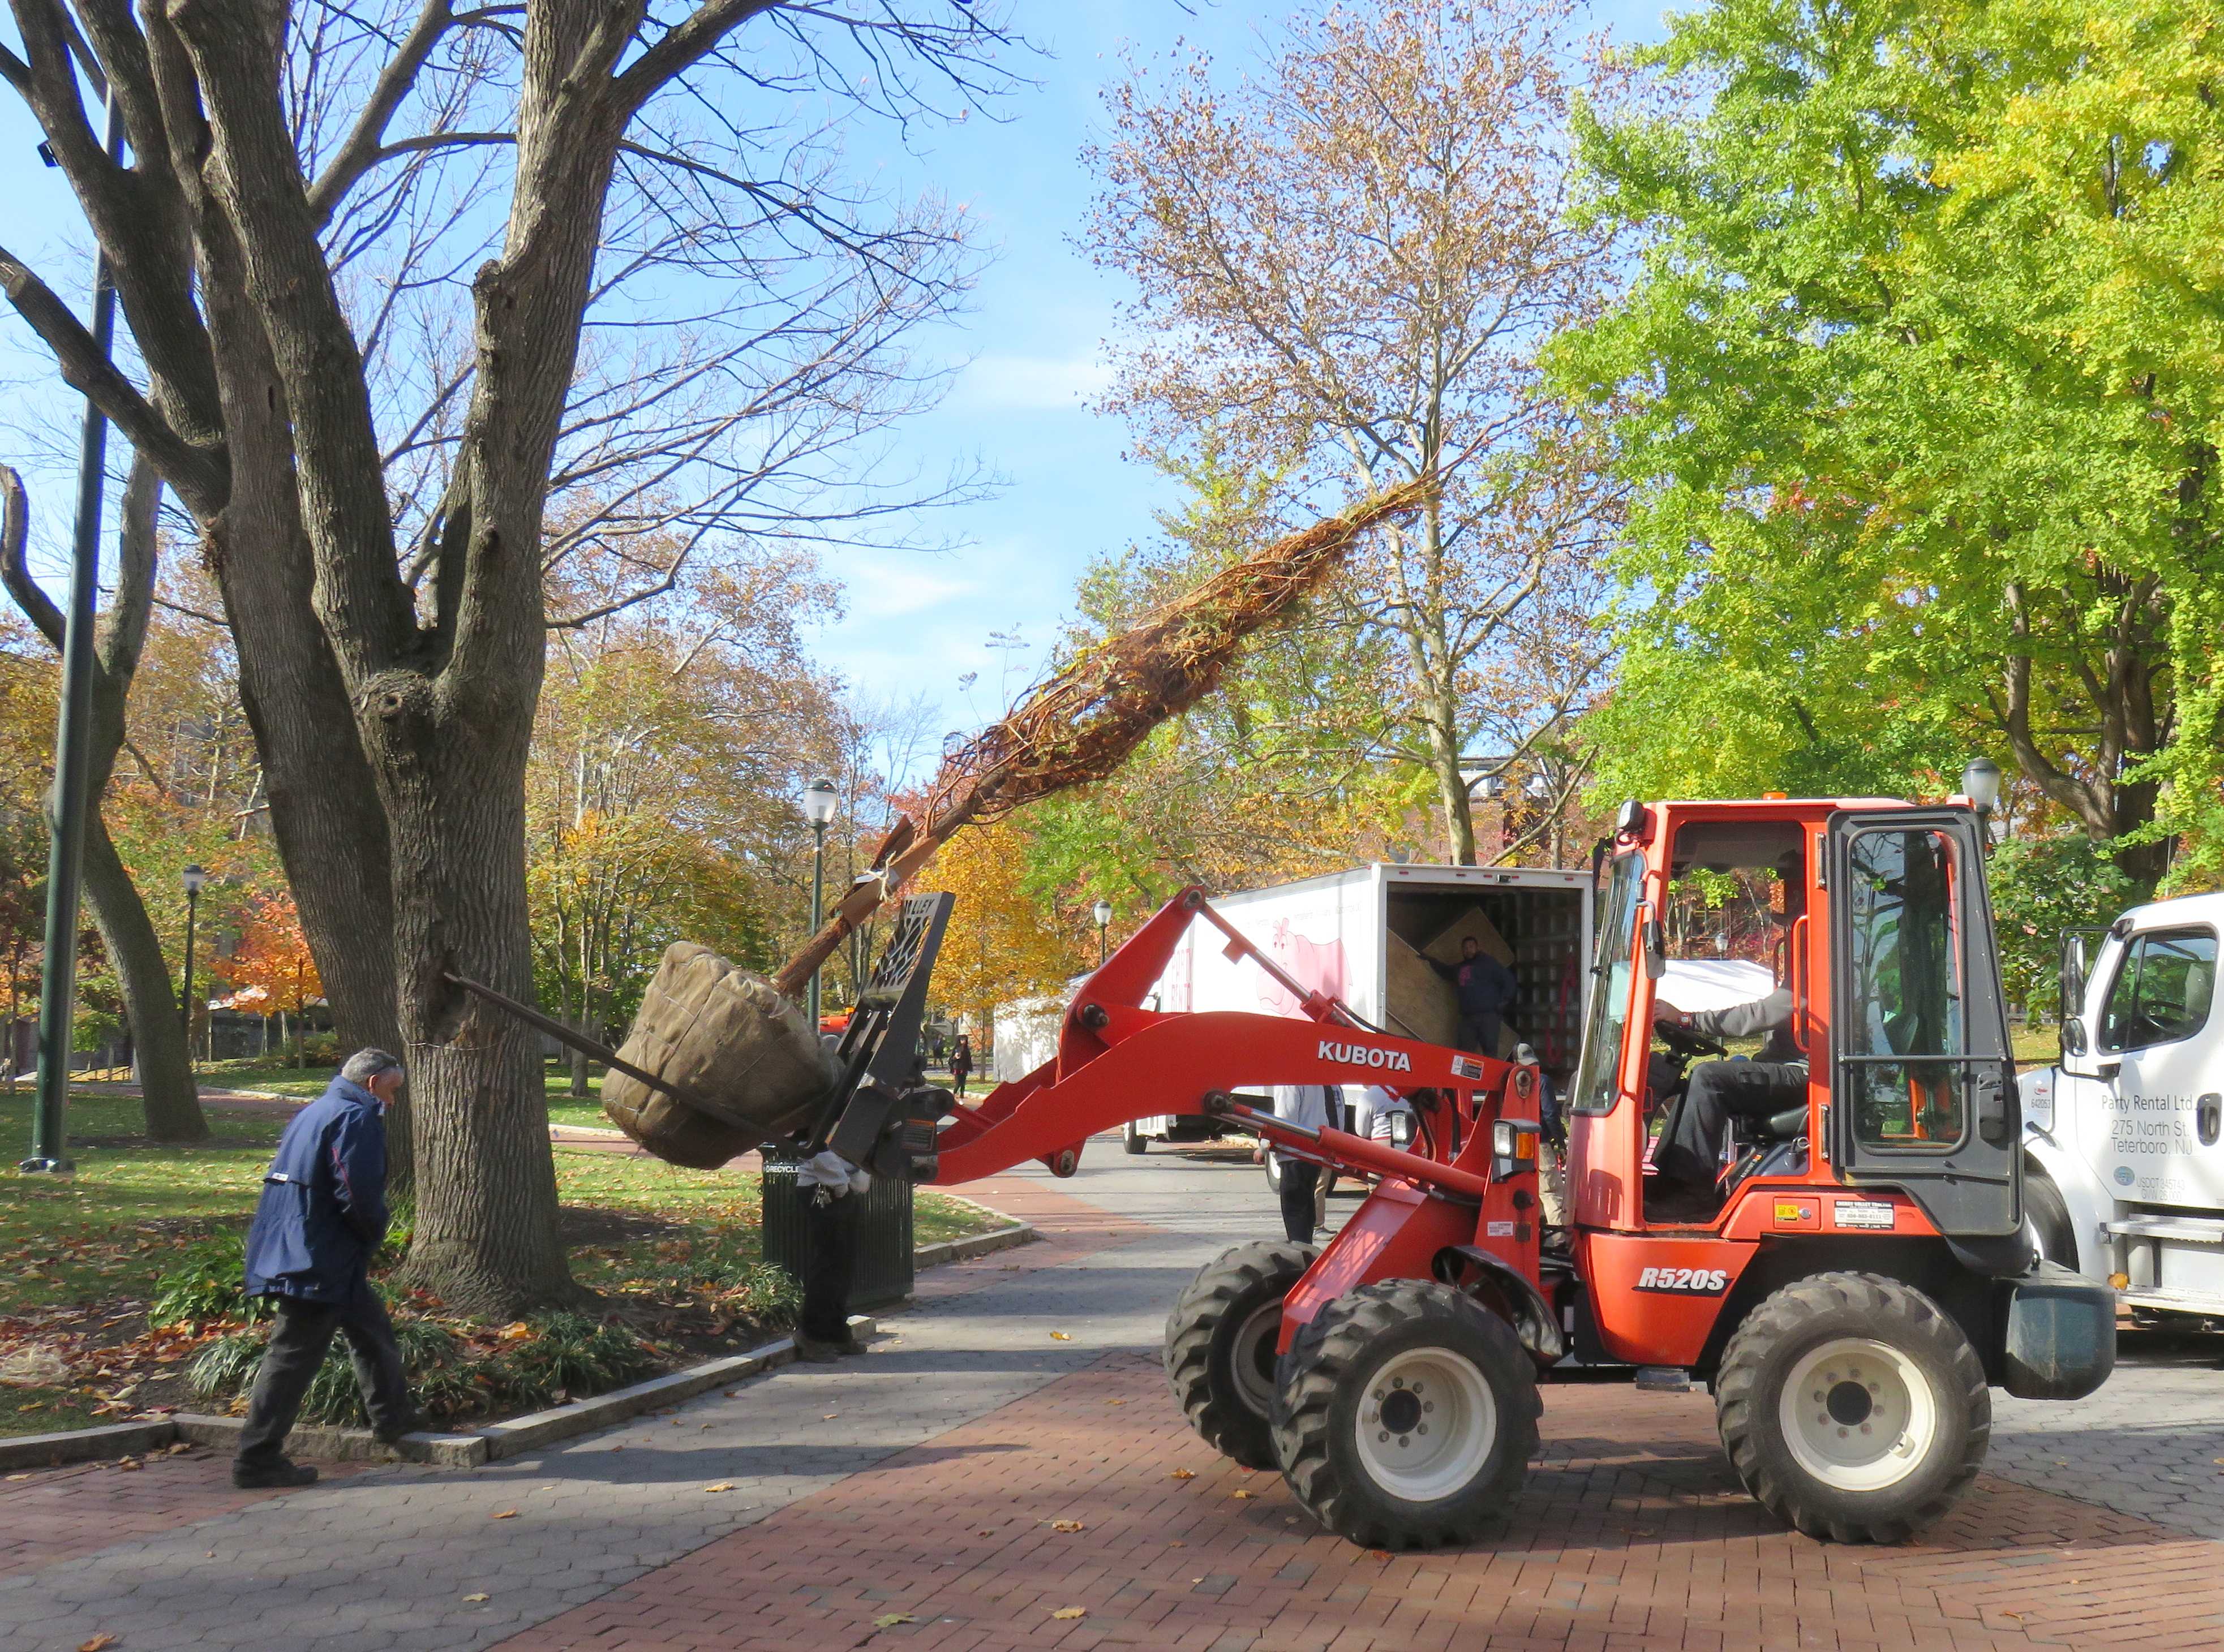 A small forklift transports a tree, ready to be planted